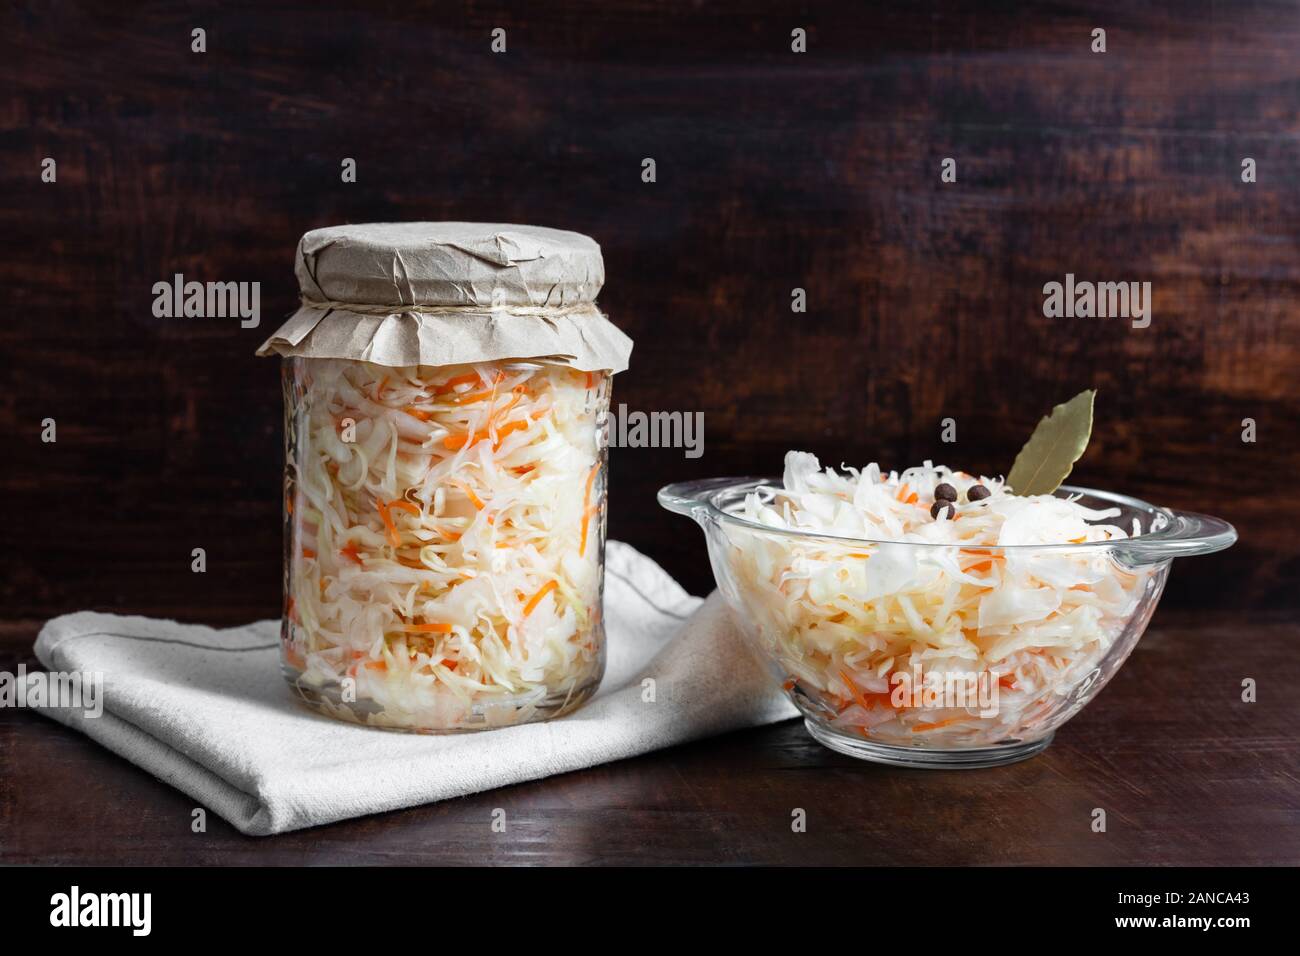 Homemade sauerkraut with carrots in a glass jar and bowl on a dark wooden background. Fermented food. Marinated vegetables. Stock Photo